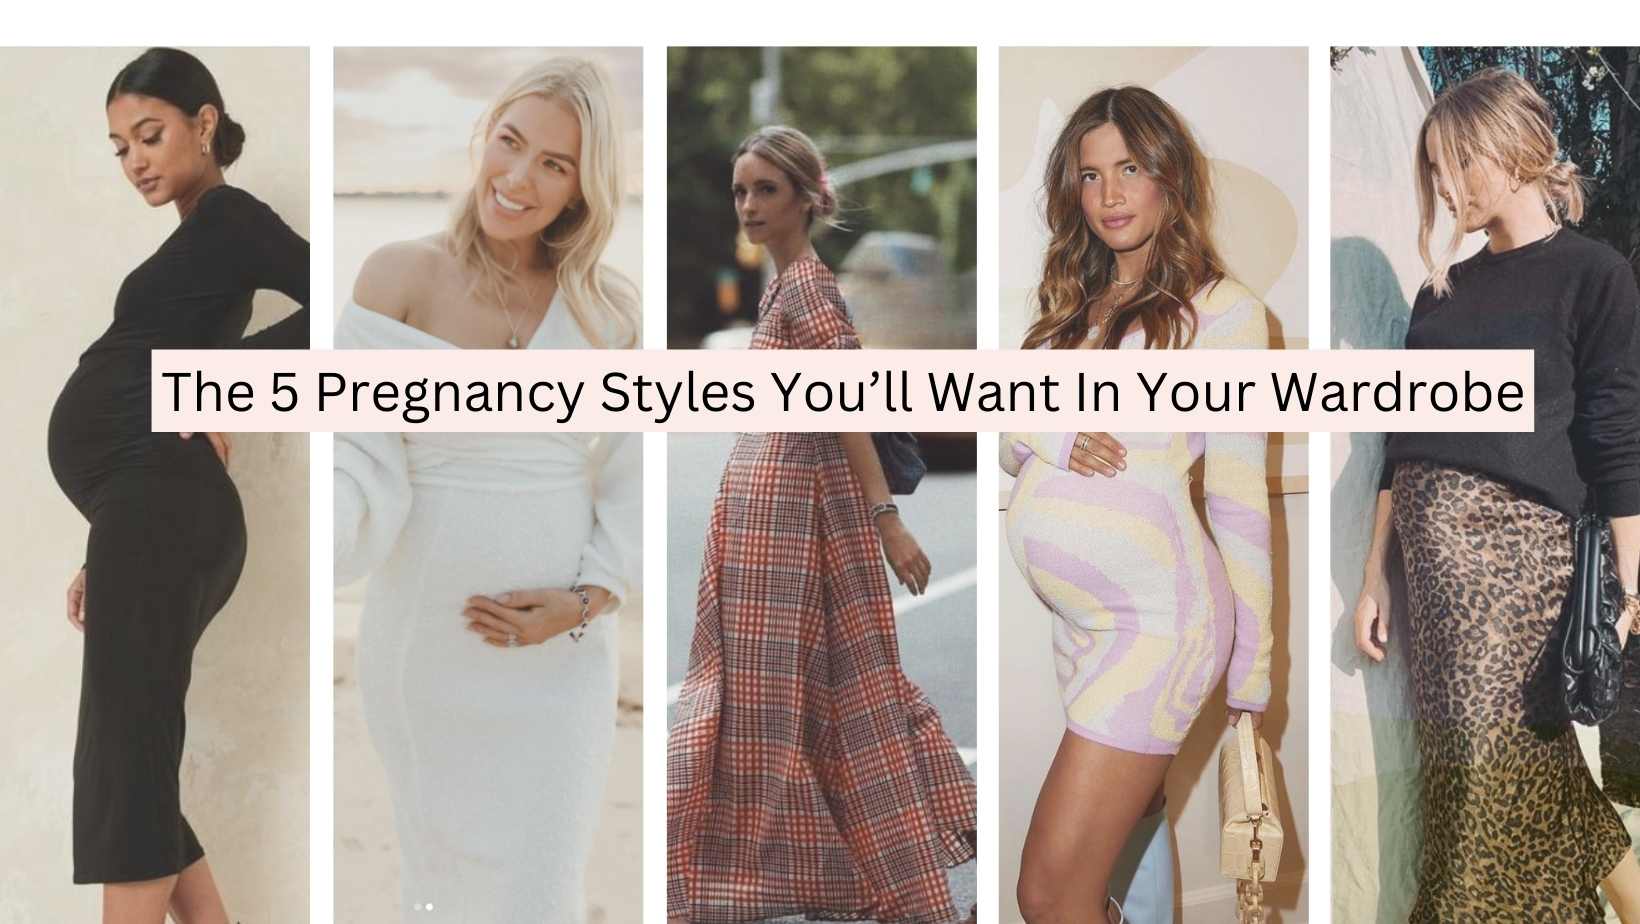 The 5 Pregnancy Styles You'll Want In Your Wardrobe